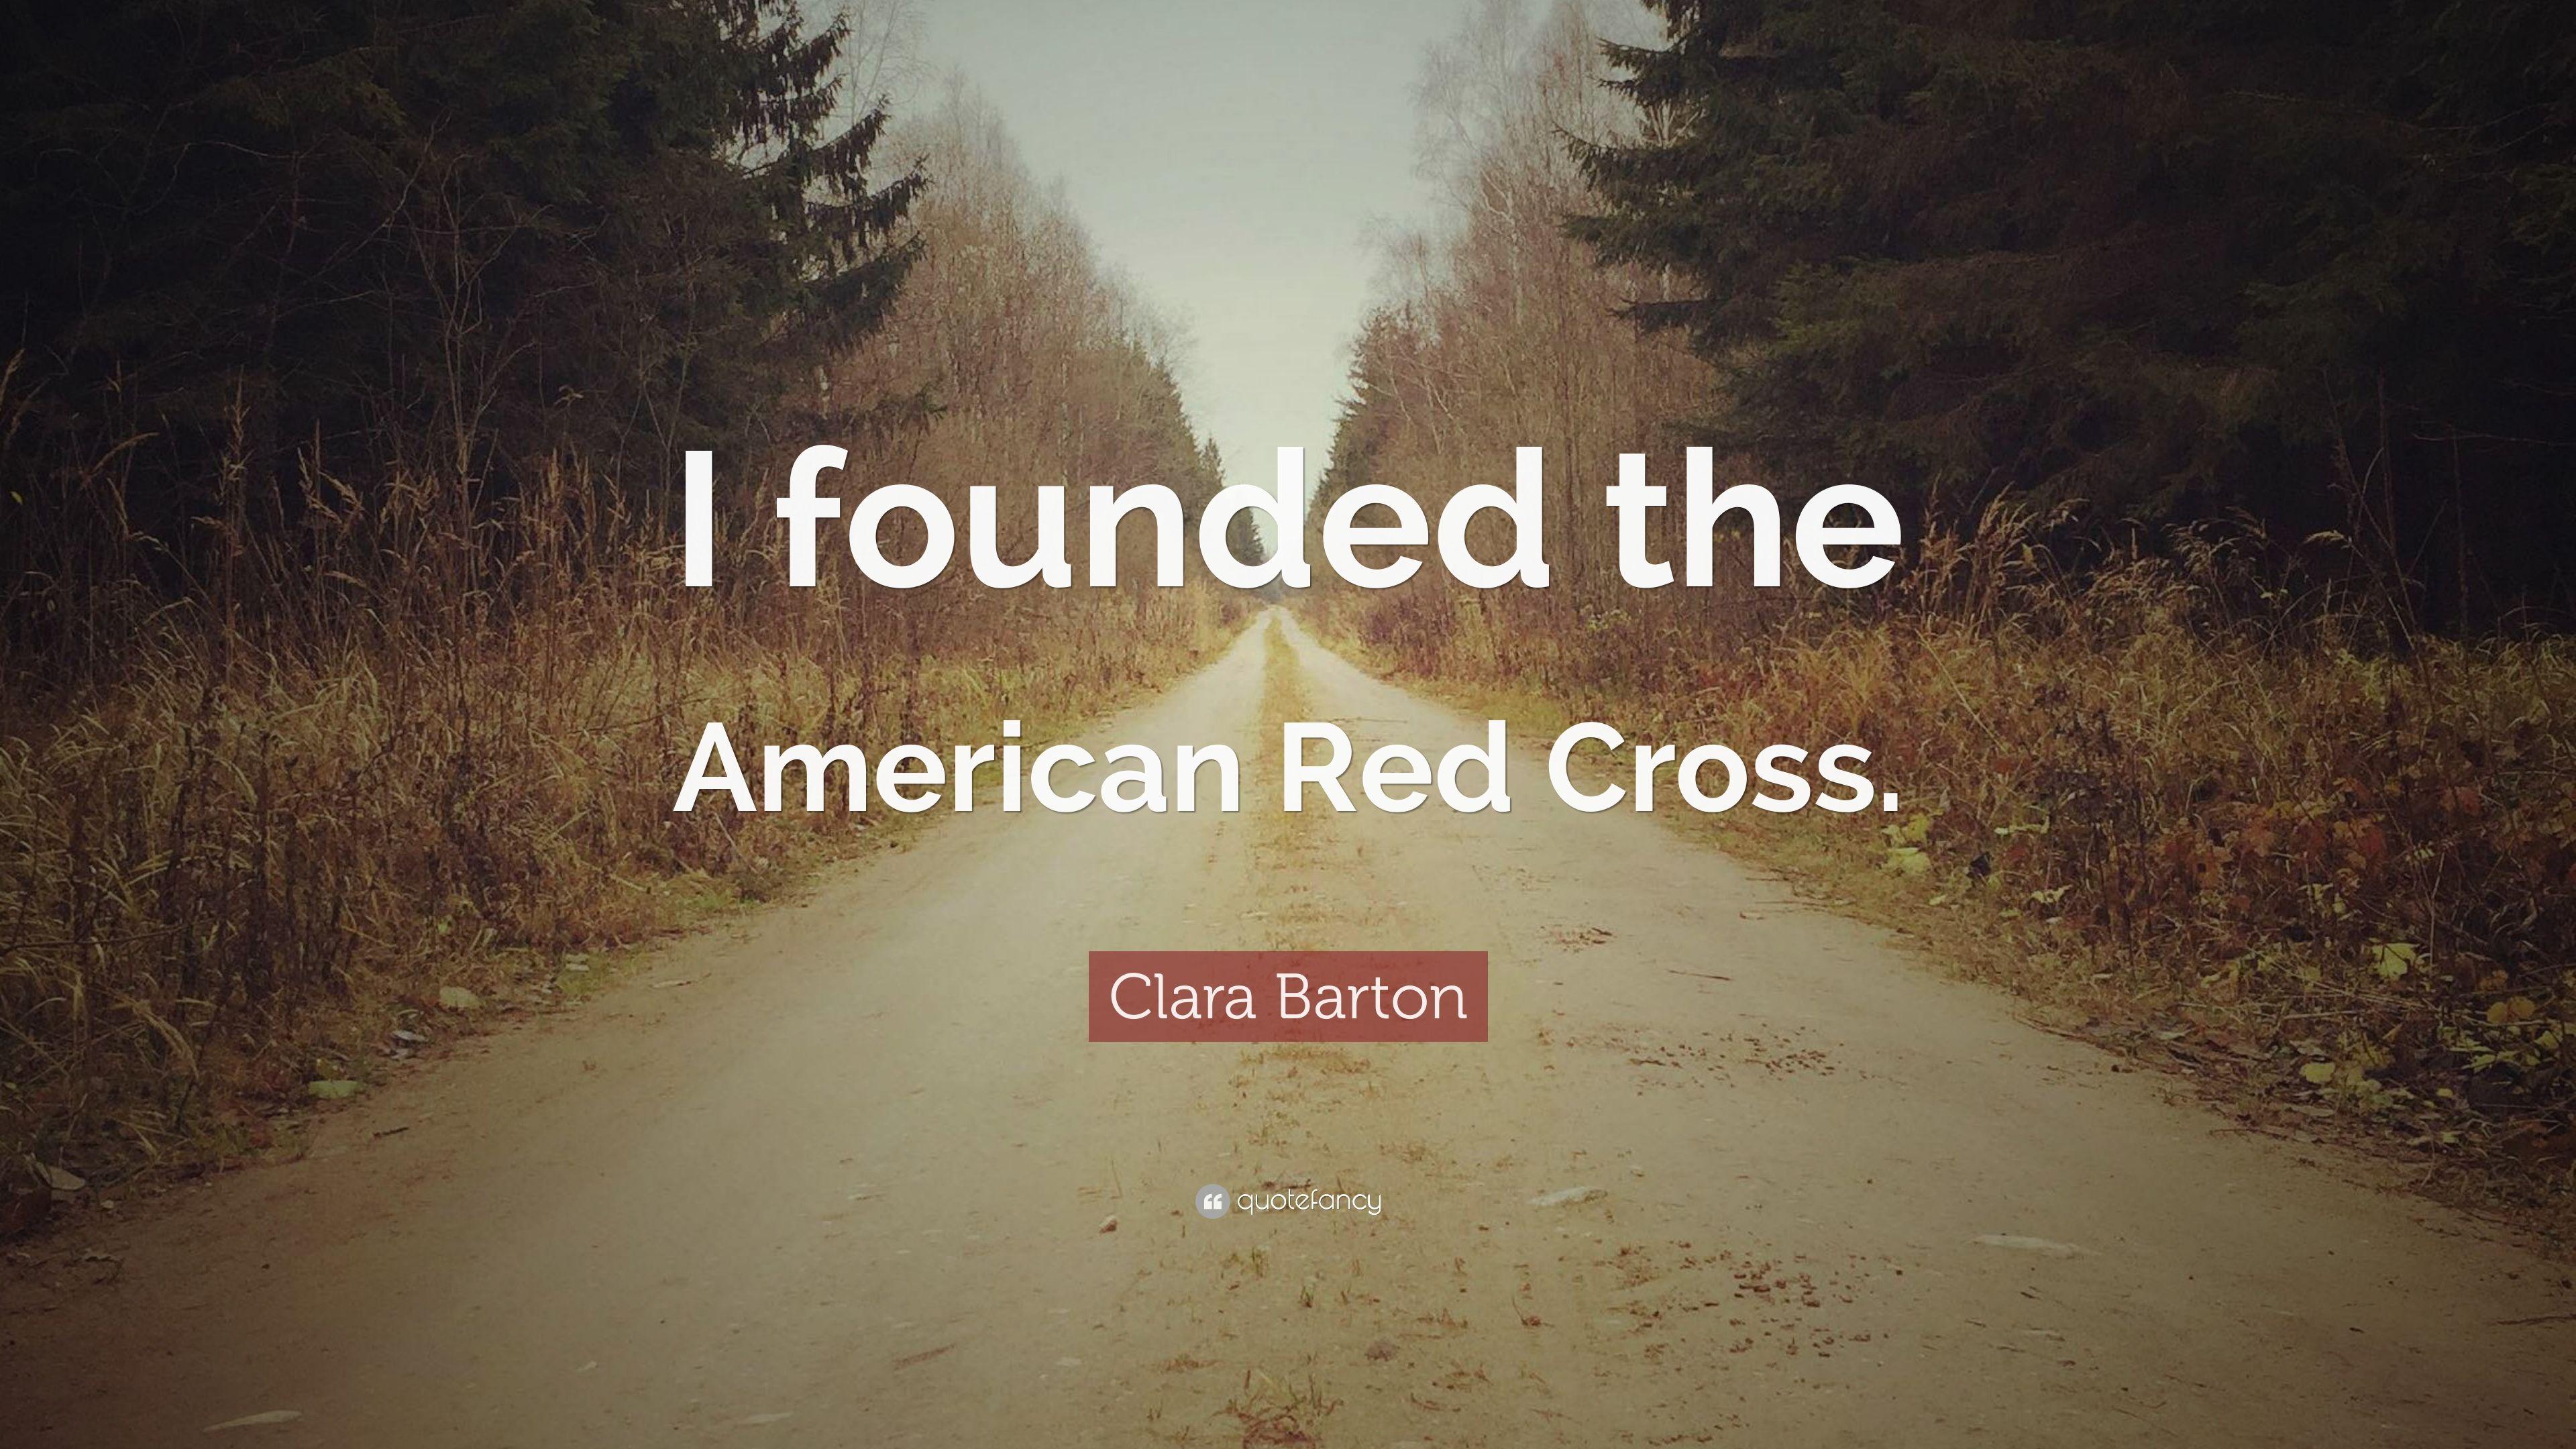 Clara Barton Quote: “I founded the American Red Cross.” 7